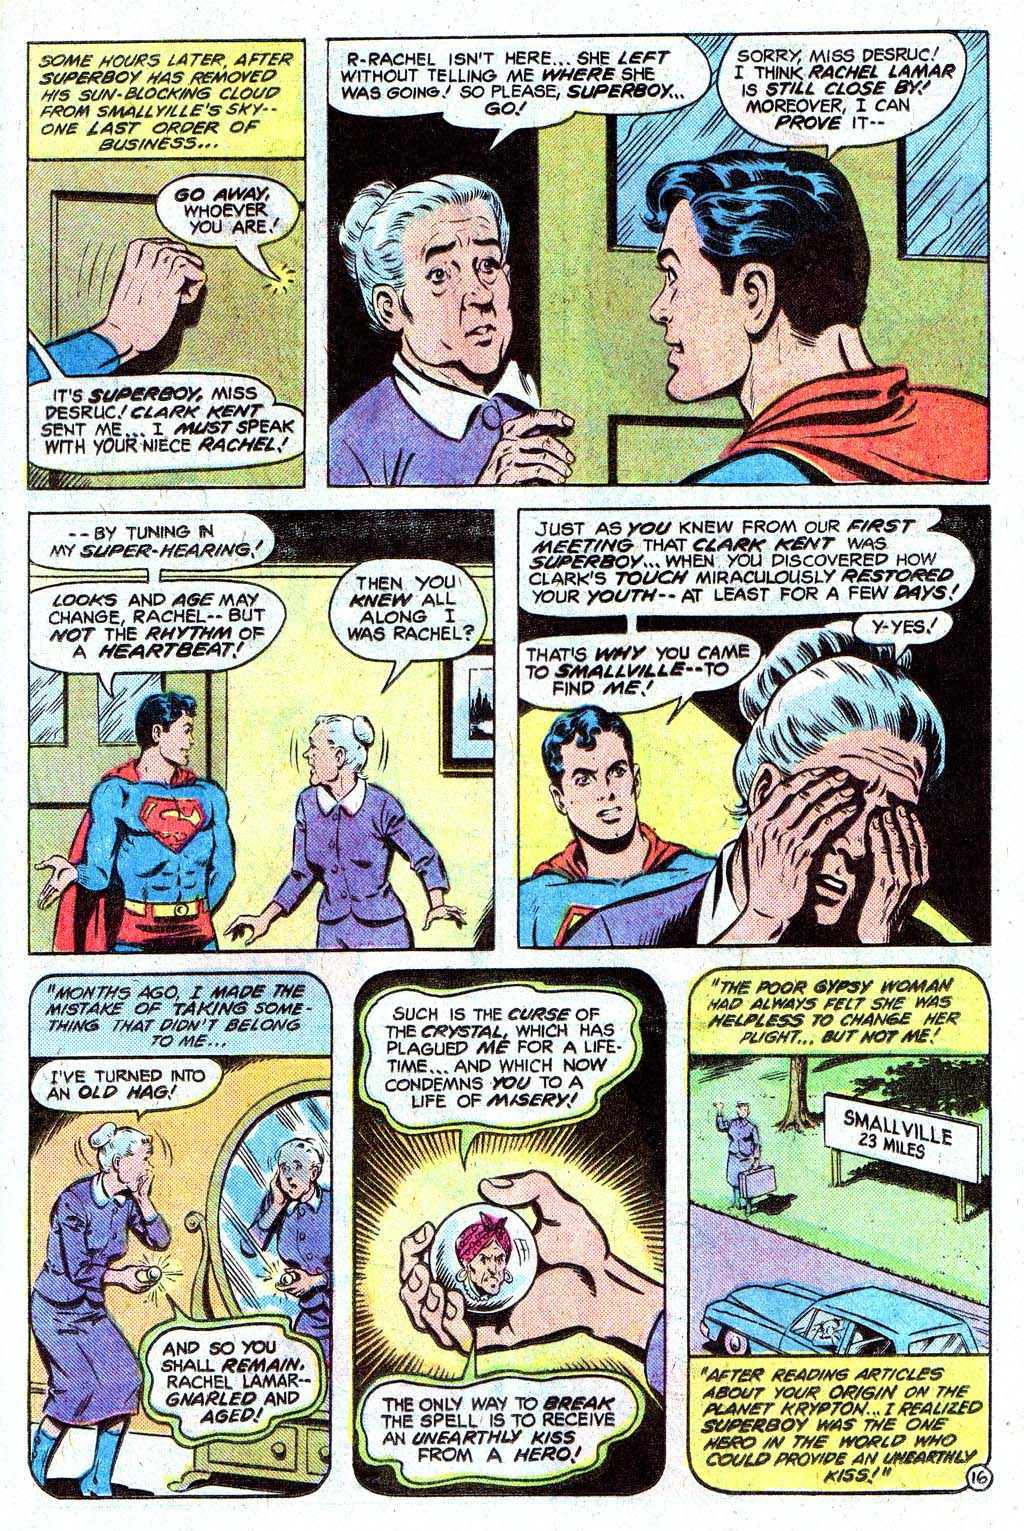 The New Adventures of Superboy 30 Page 20